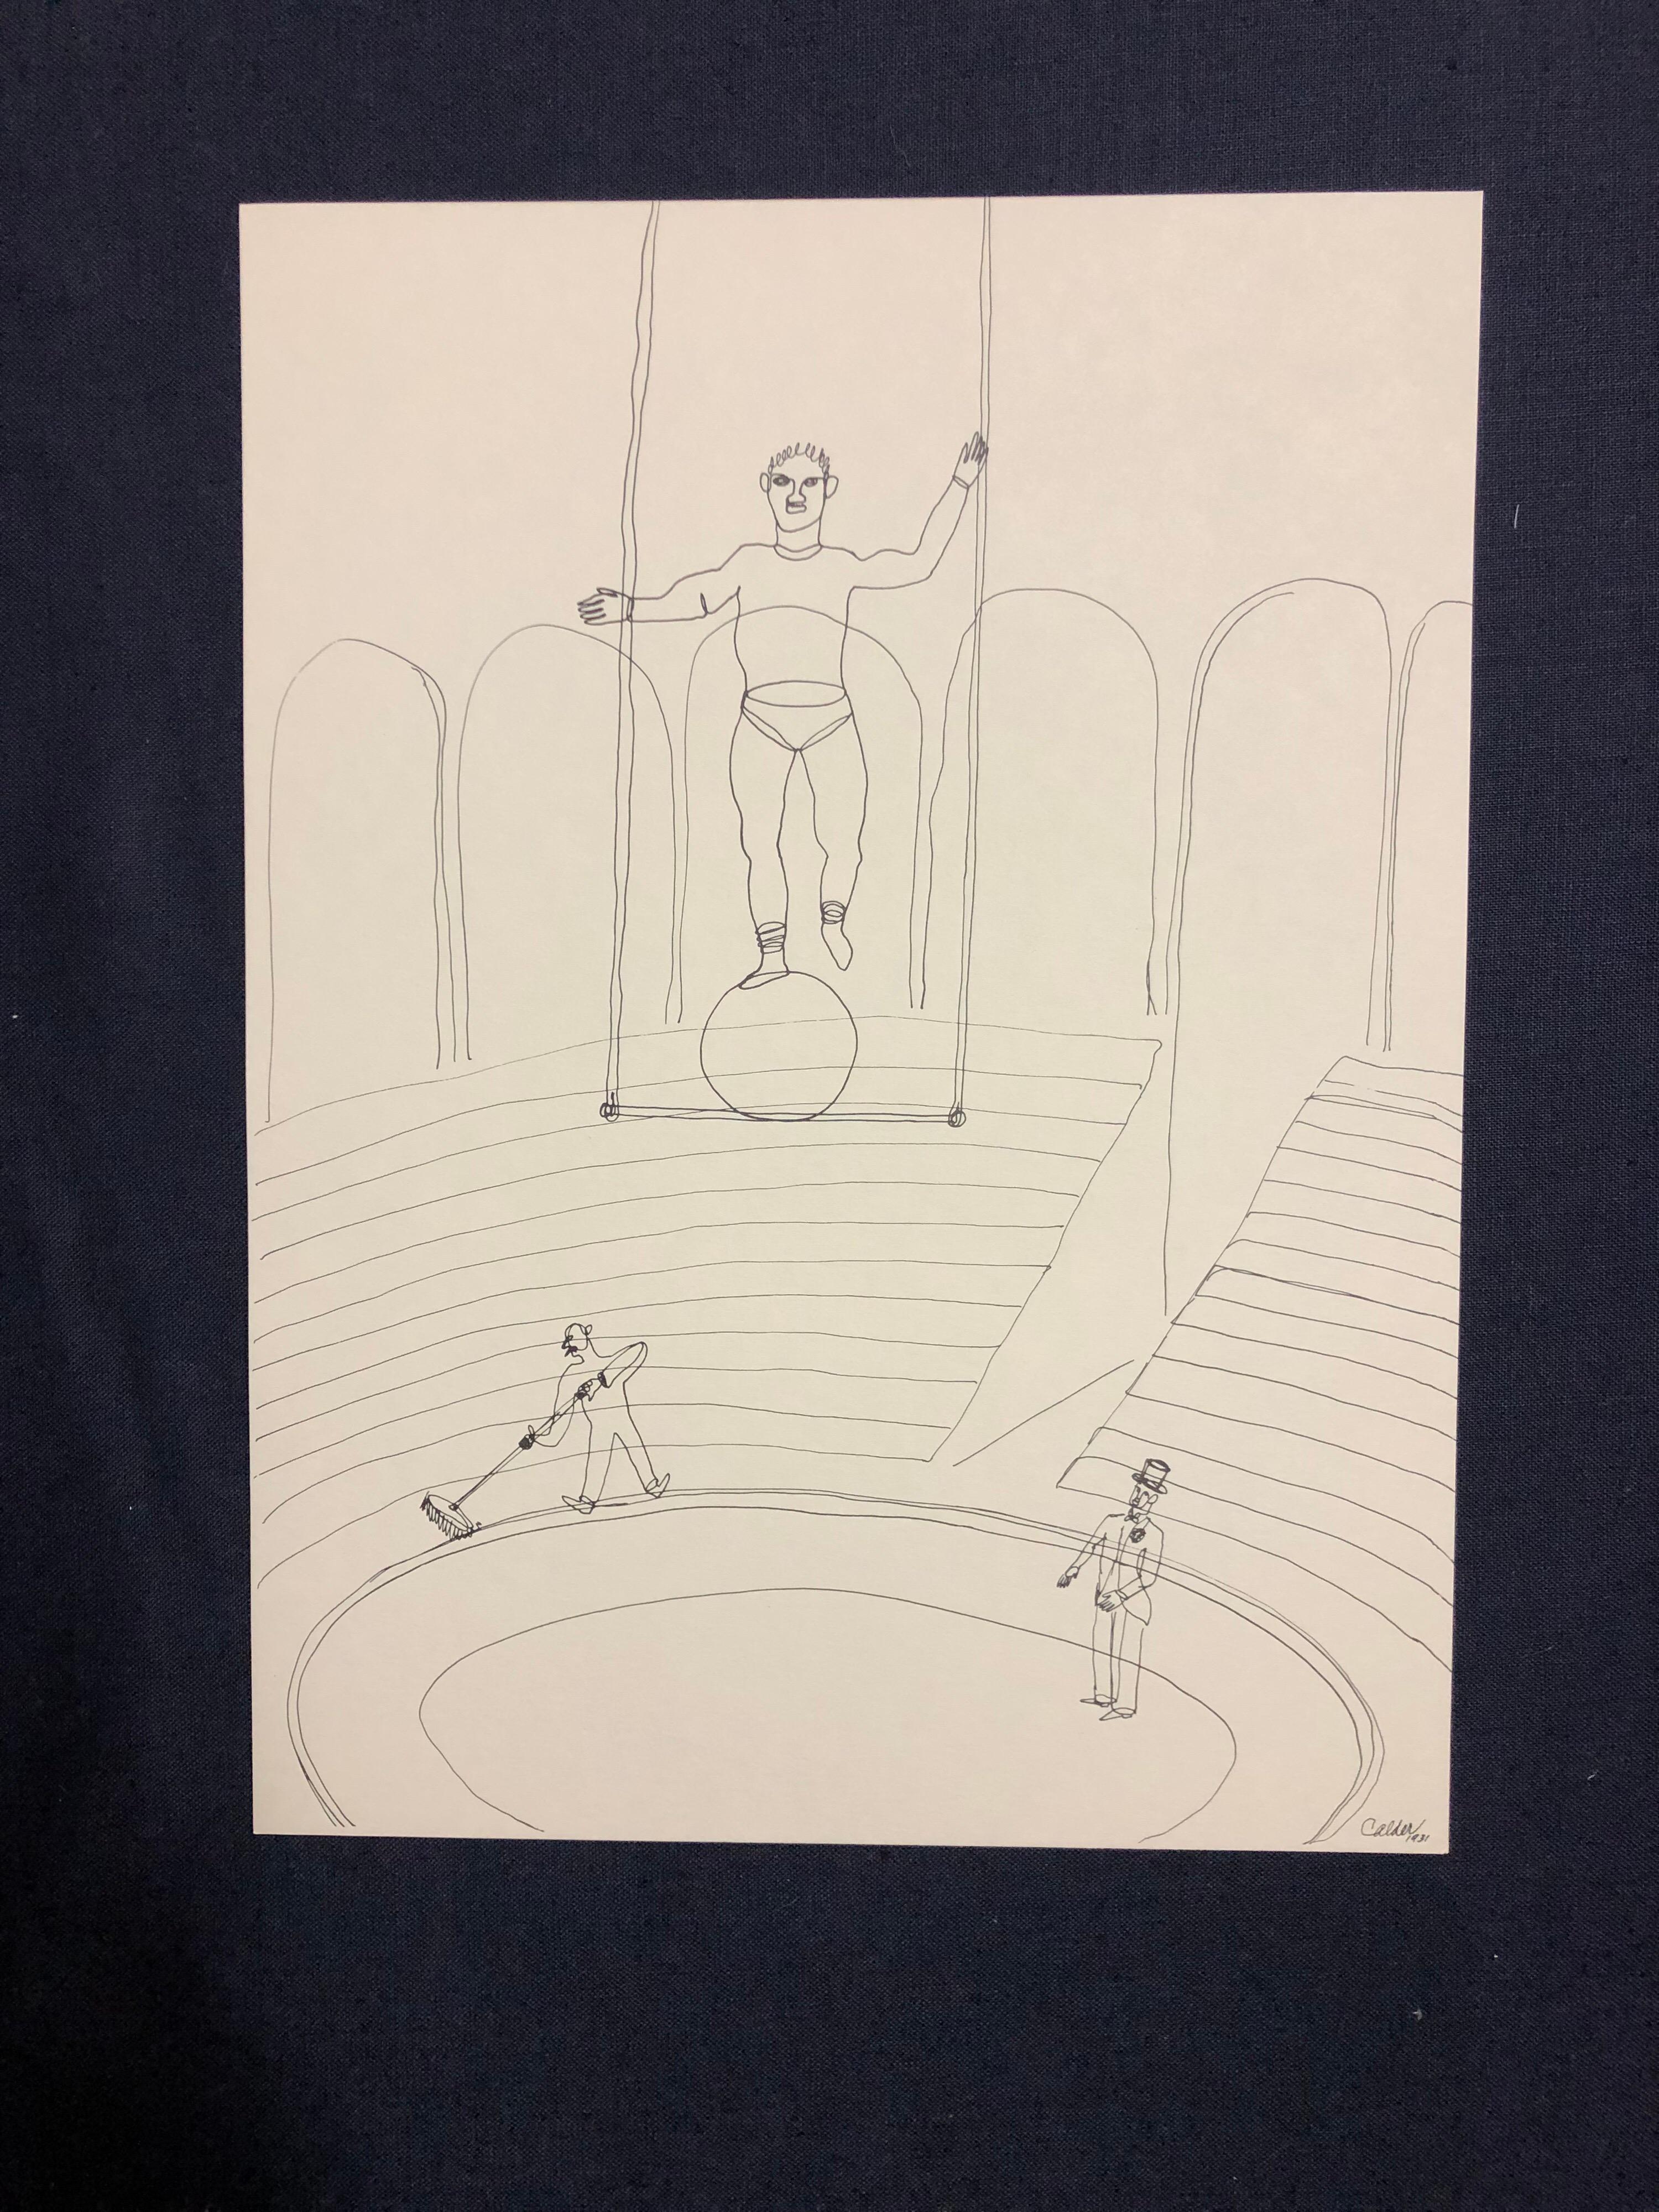 Calder Circus, Complete Set of 16 Lithographs After the Original Drawings 7